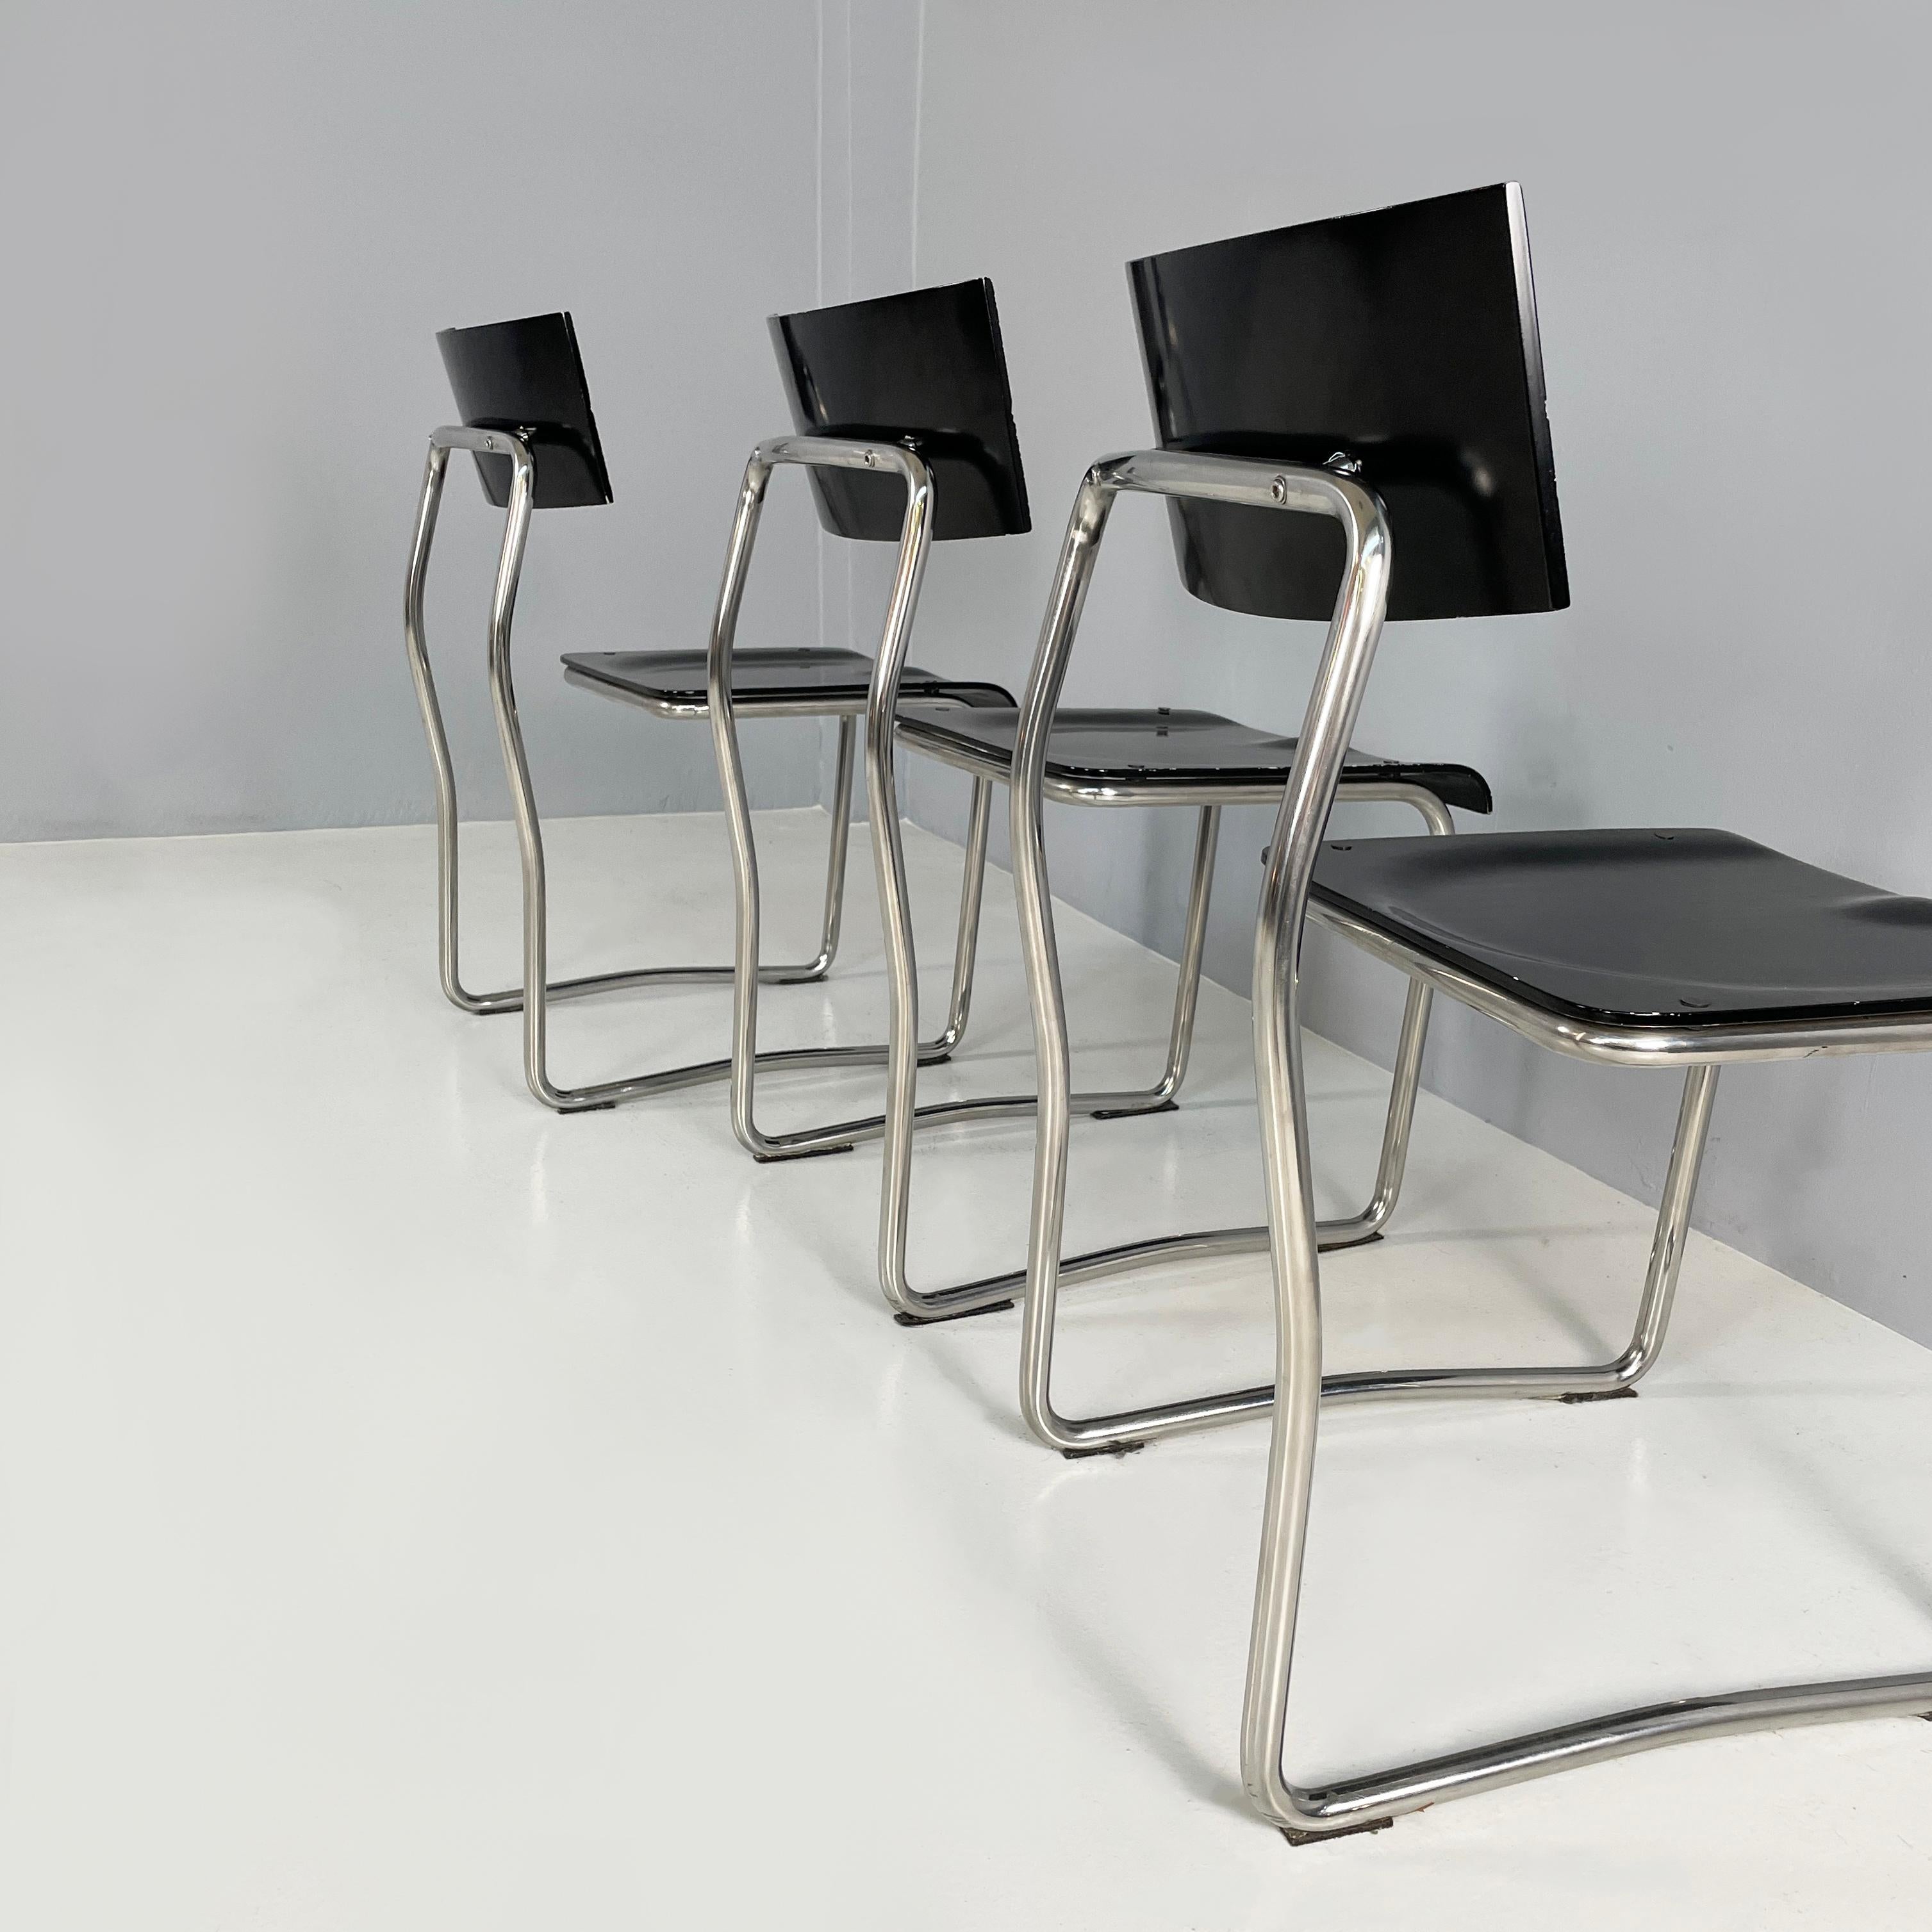 Italian modern Black wood and metal Chairs Lariana by Terragni for Zanotta, 1980 For Sale 1